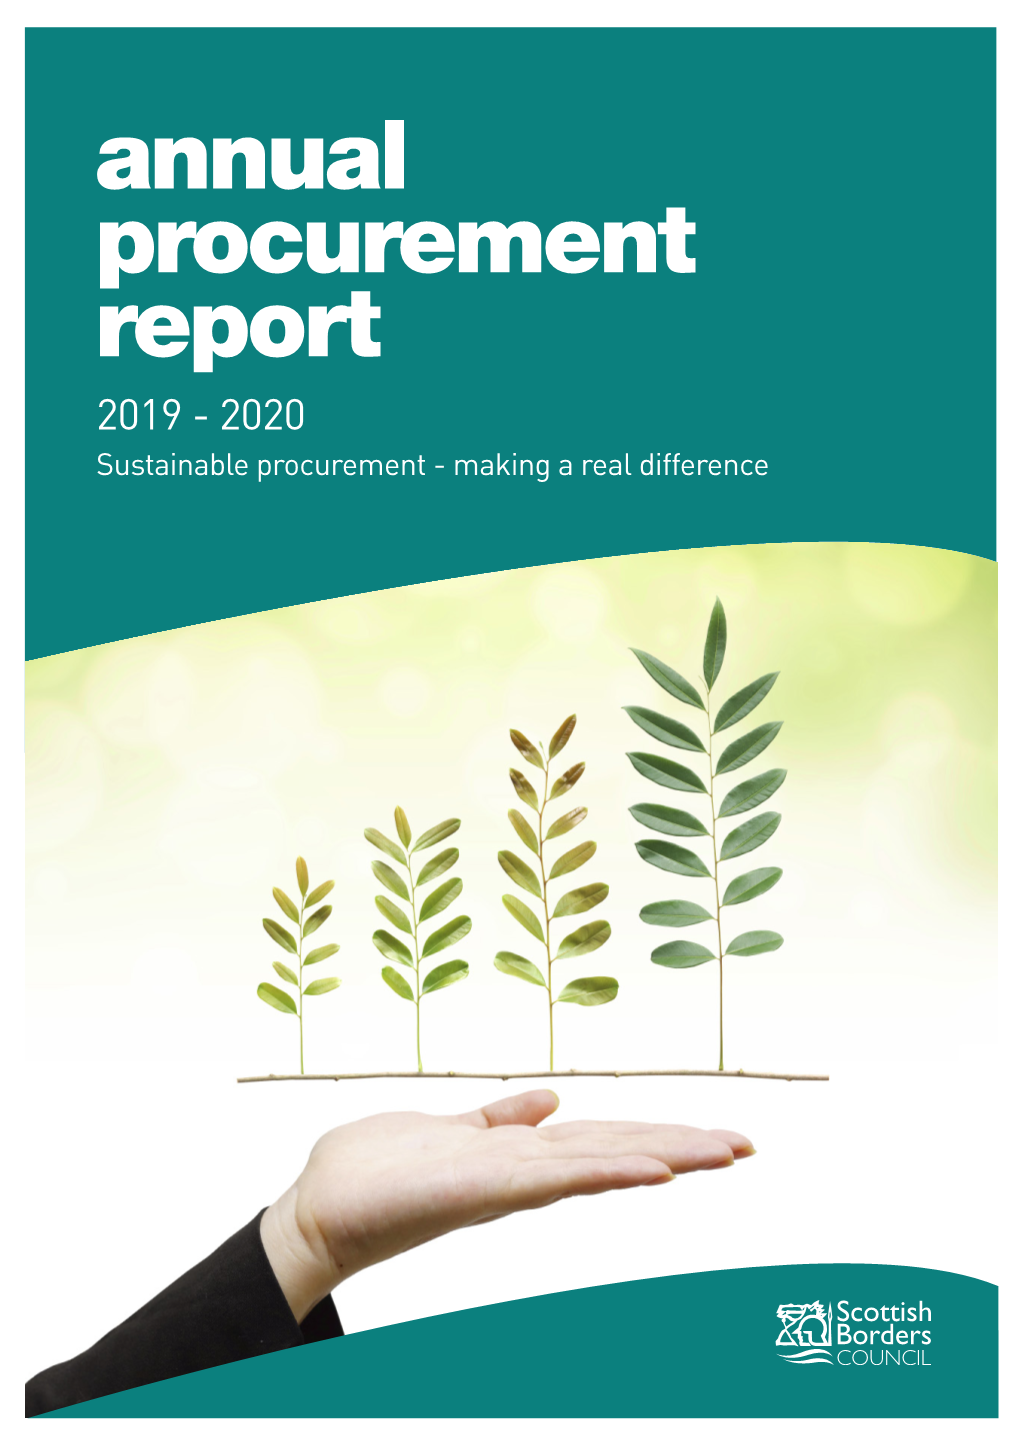 Annual Procurement Report 2019 - 2020 Sustainable Procurement - Making a Real Difference CONTENTS